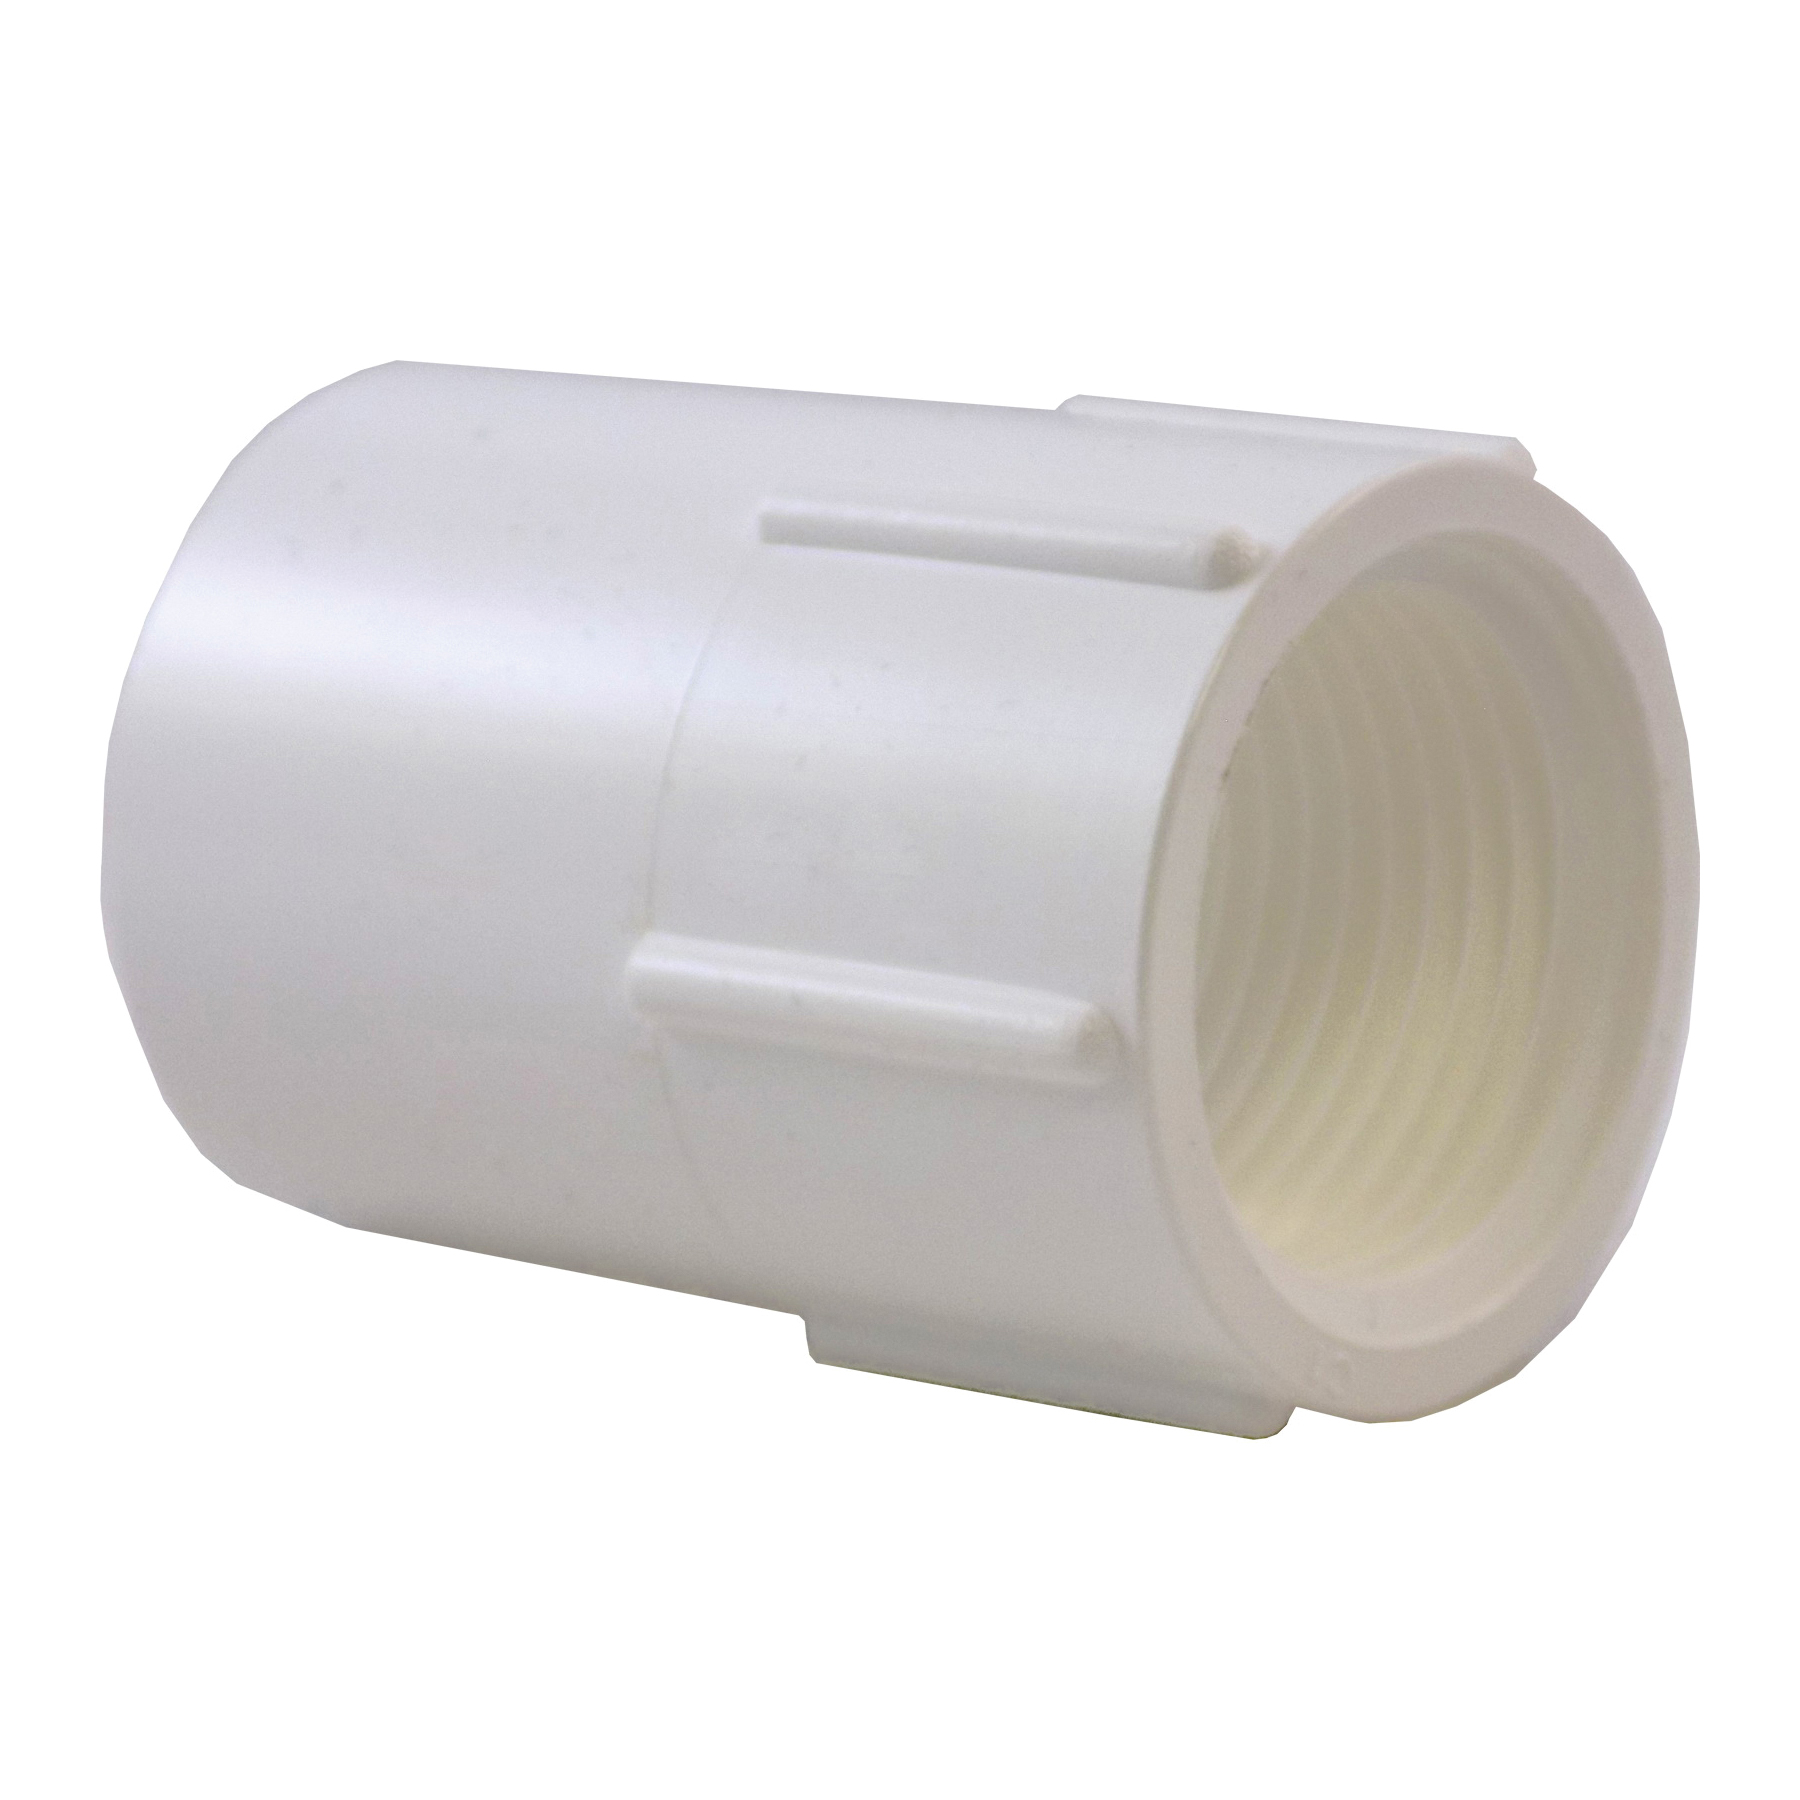 PVC PIPE 1X1 IN OD COUPLING ADAPTER FEMALE FPT SCH 40